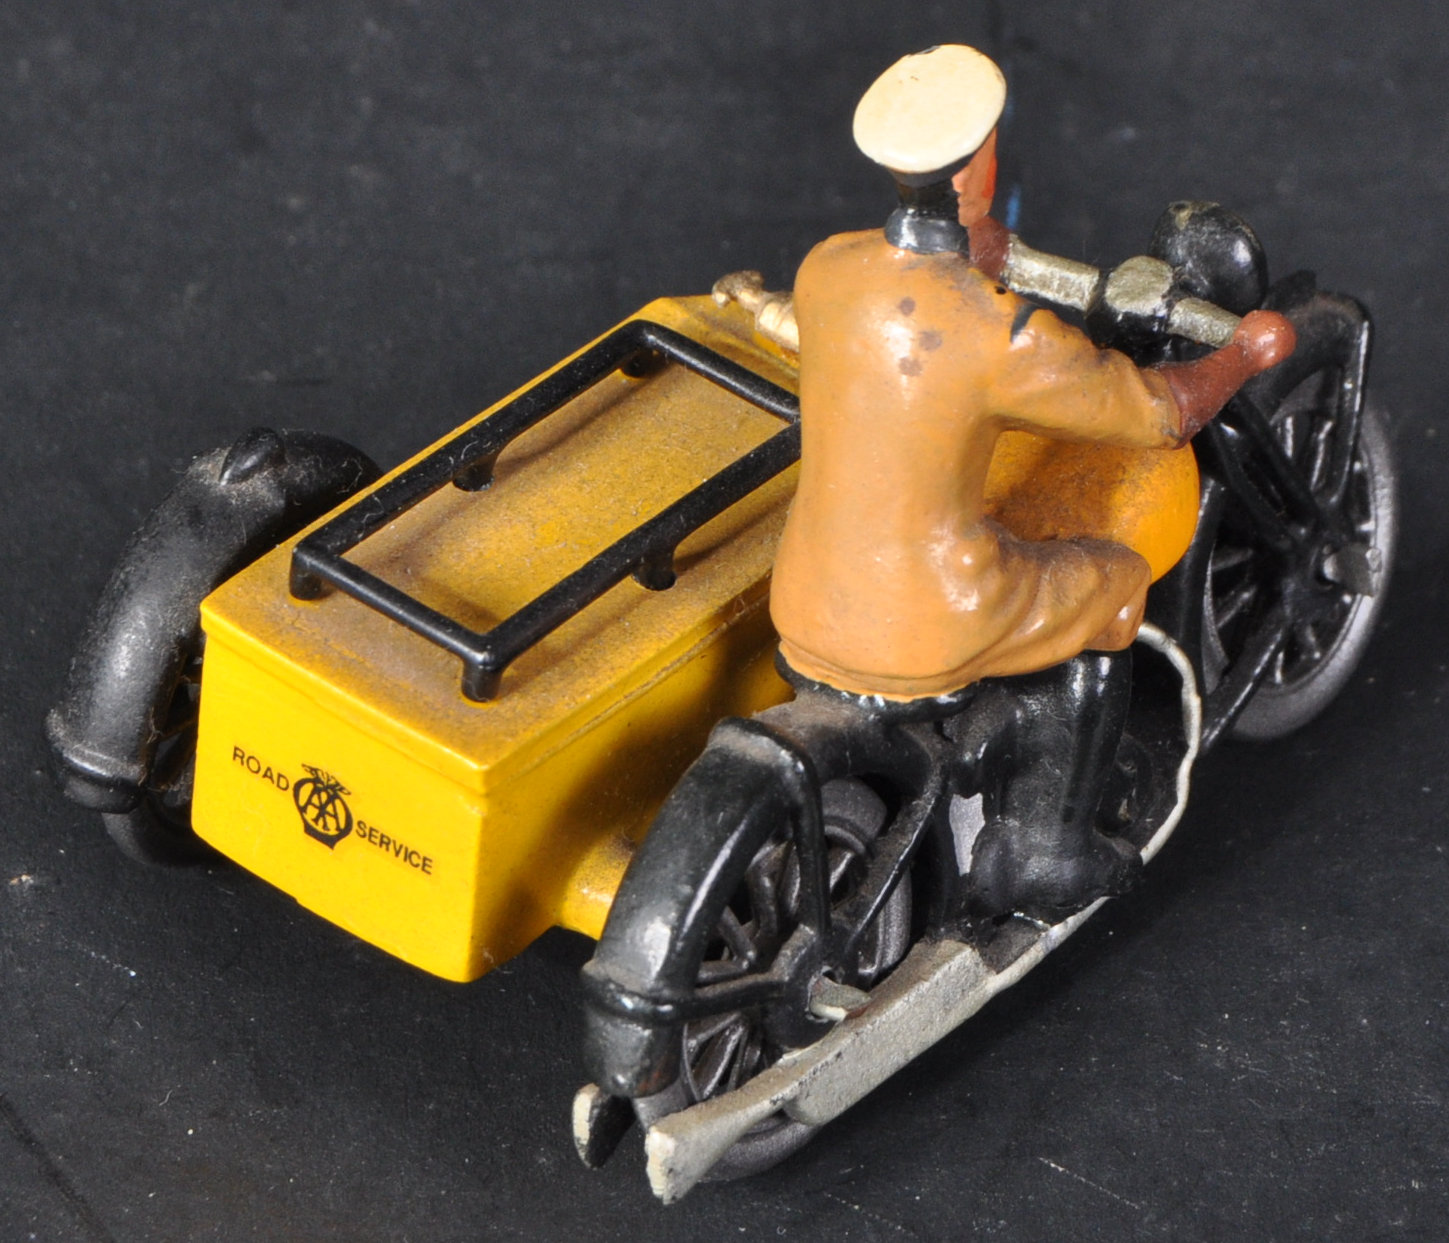 TWO VINTAGE DGM DAVE GILBERT MODELS DIECAST MOTORBIKES - Image 6 of 7